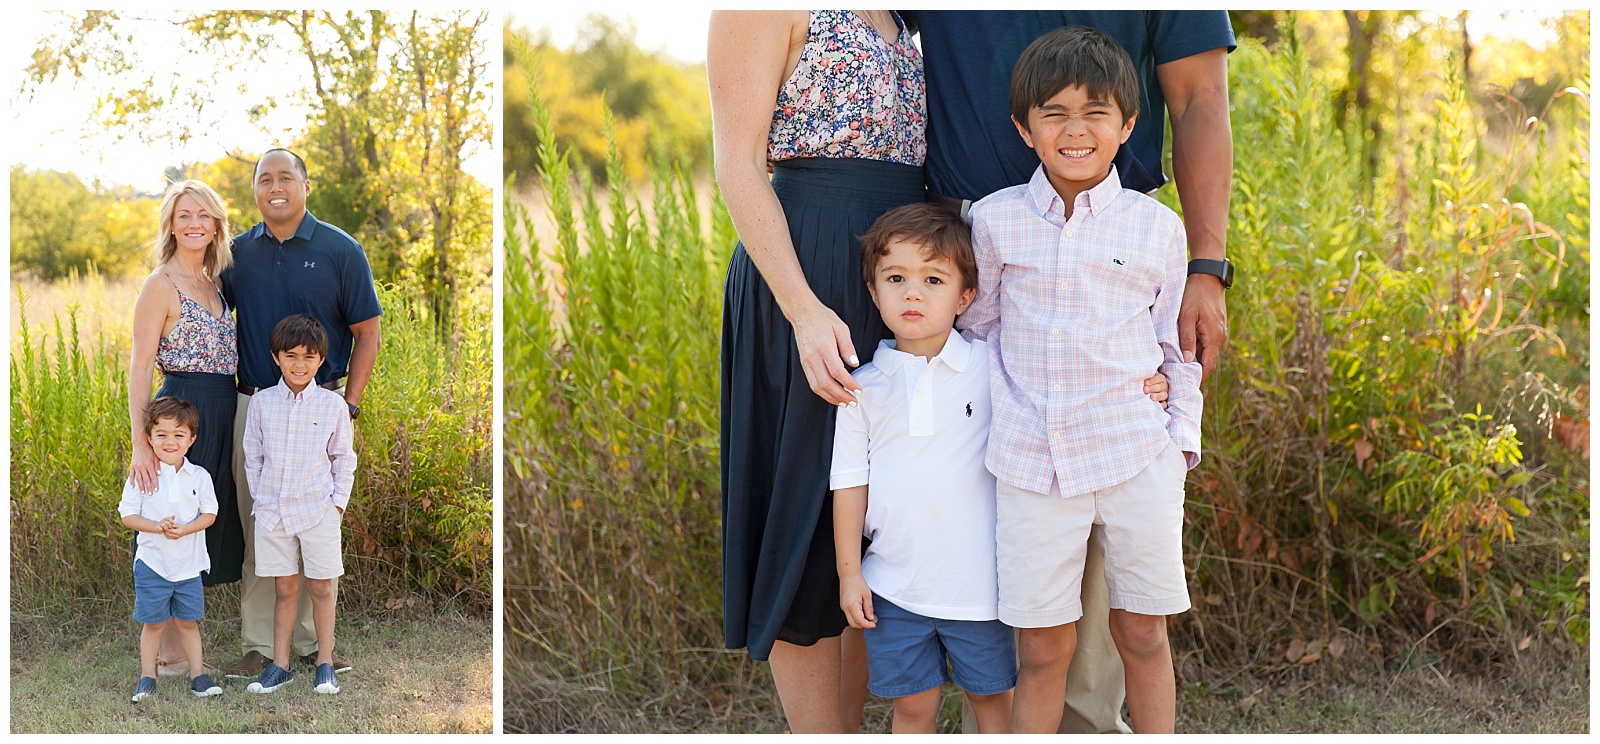 An extended family session at Arbor Hills Nature Preserve in Dallas Texas by Alyssa Grace Photography